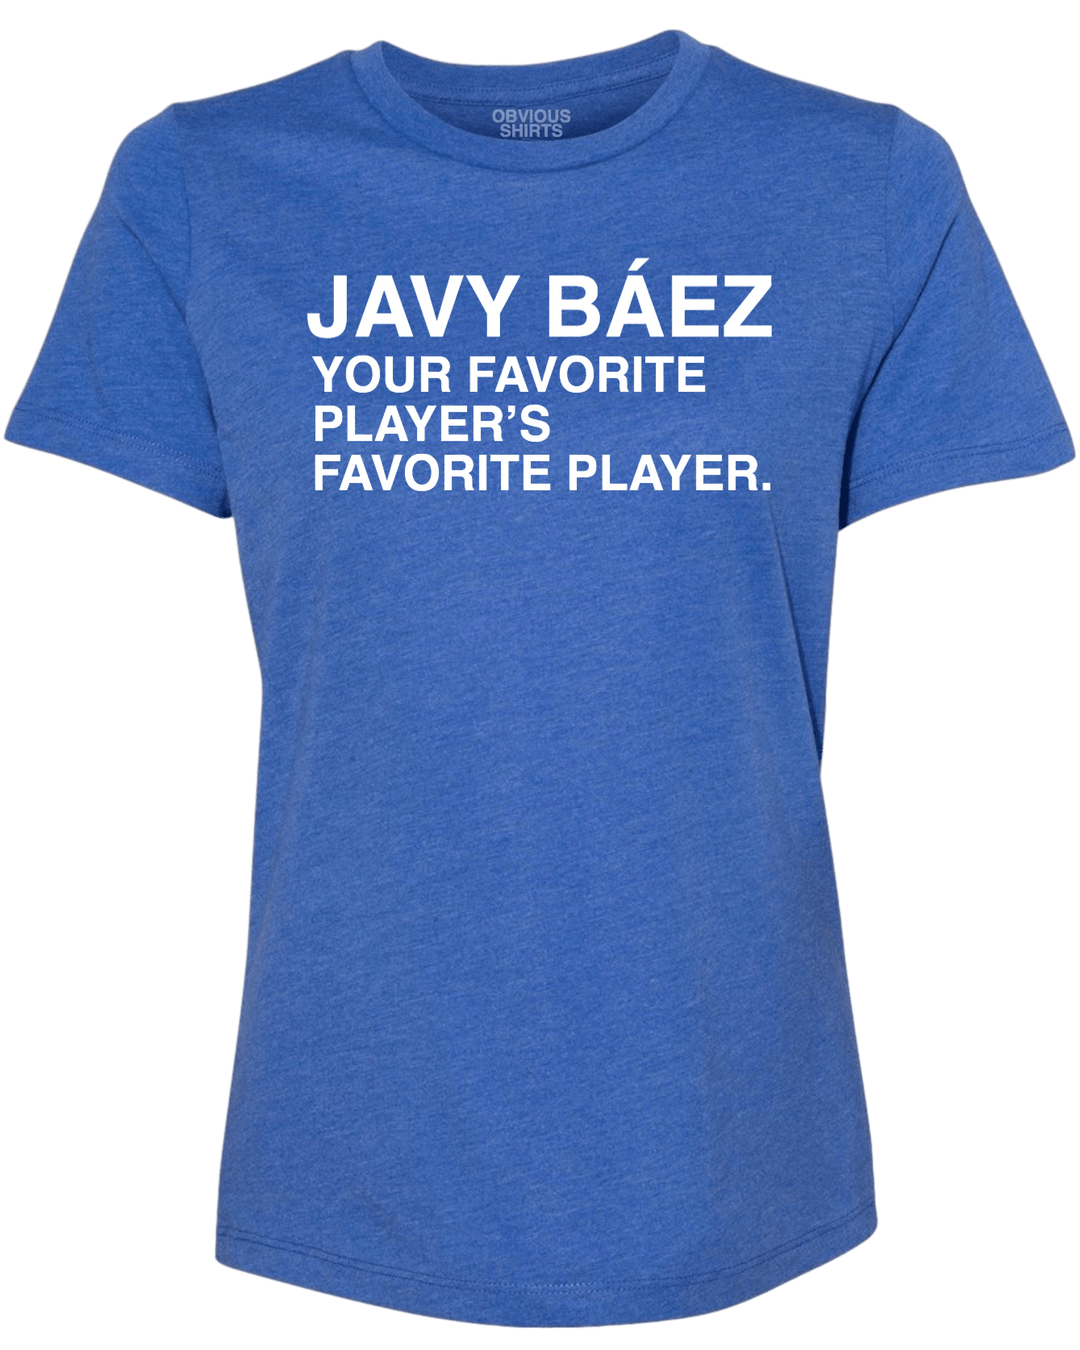 obviousshirts Javy Baez Your Favorite Player's Favorite Player. (Women's Crew) Blue / LG